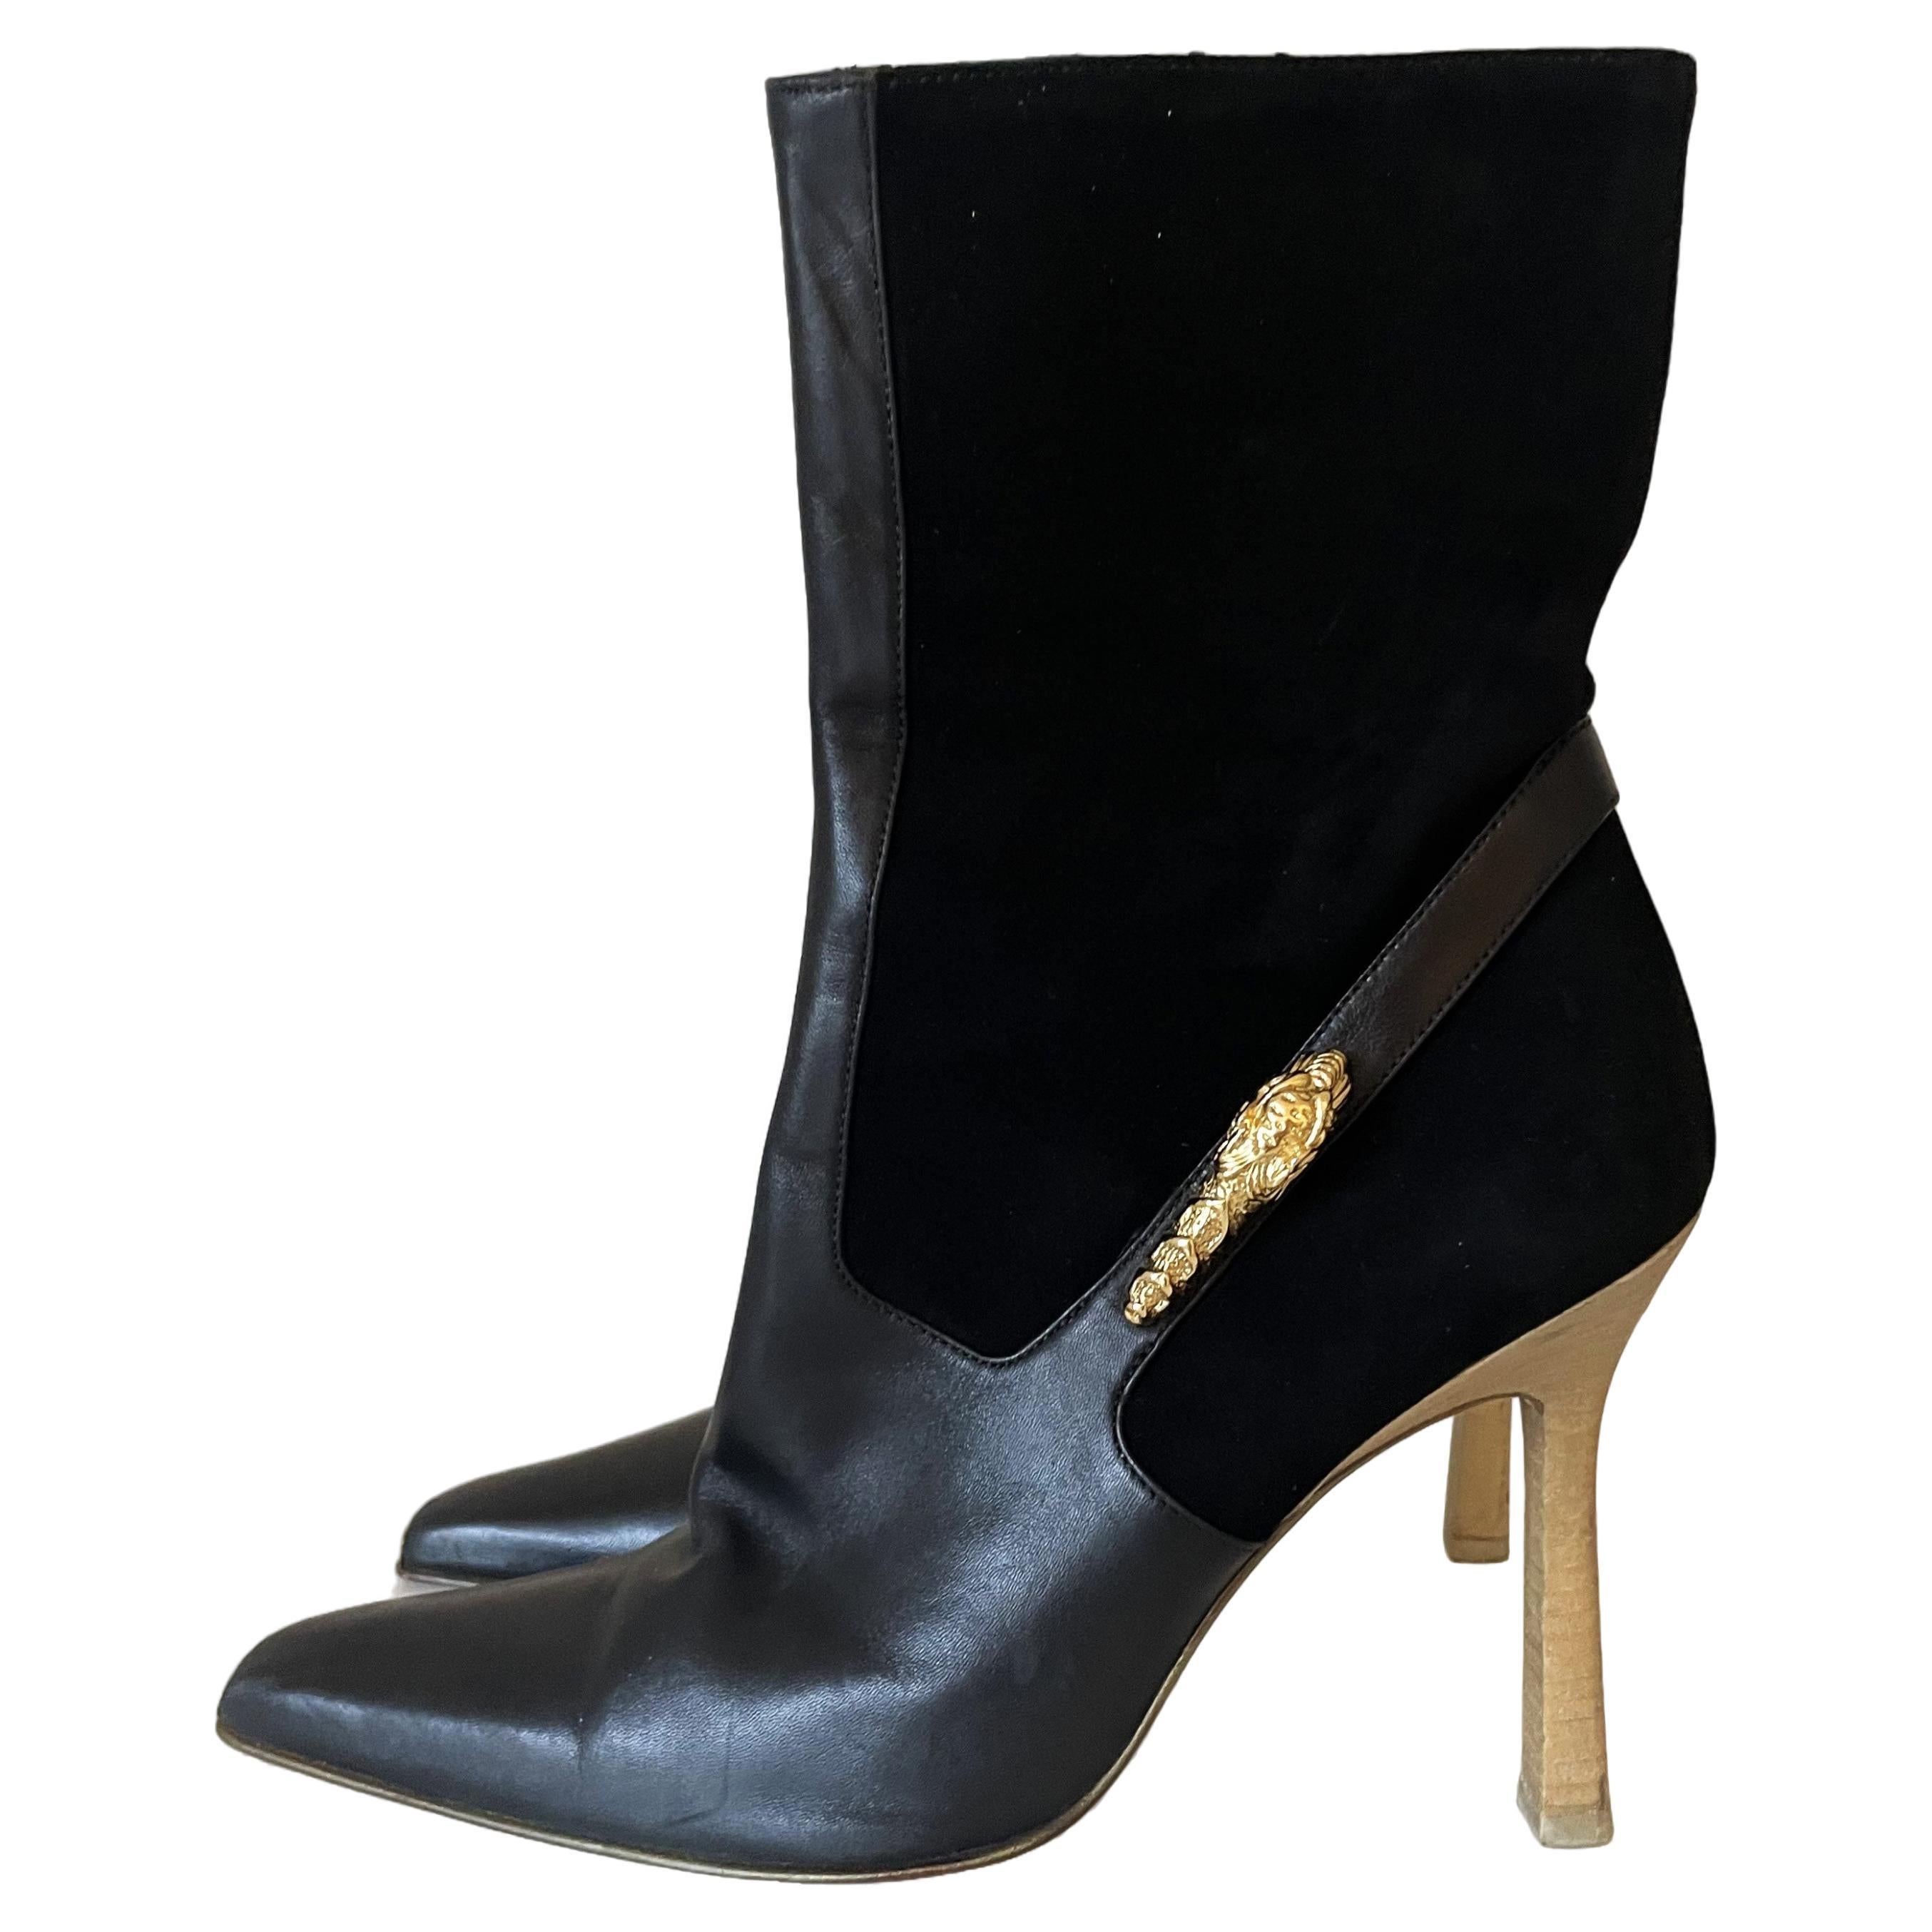 Gucci Rare Black Suede Leather High Heel Ankle Boots Gold Metal Panther For Sale